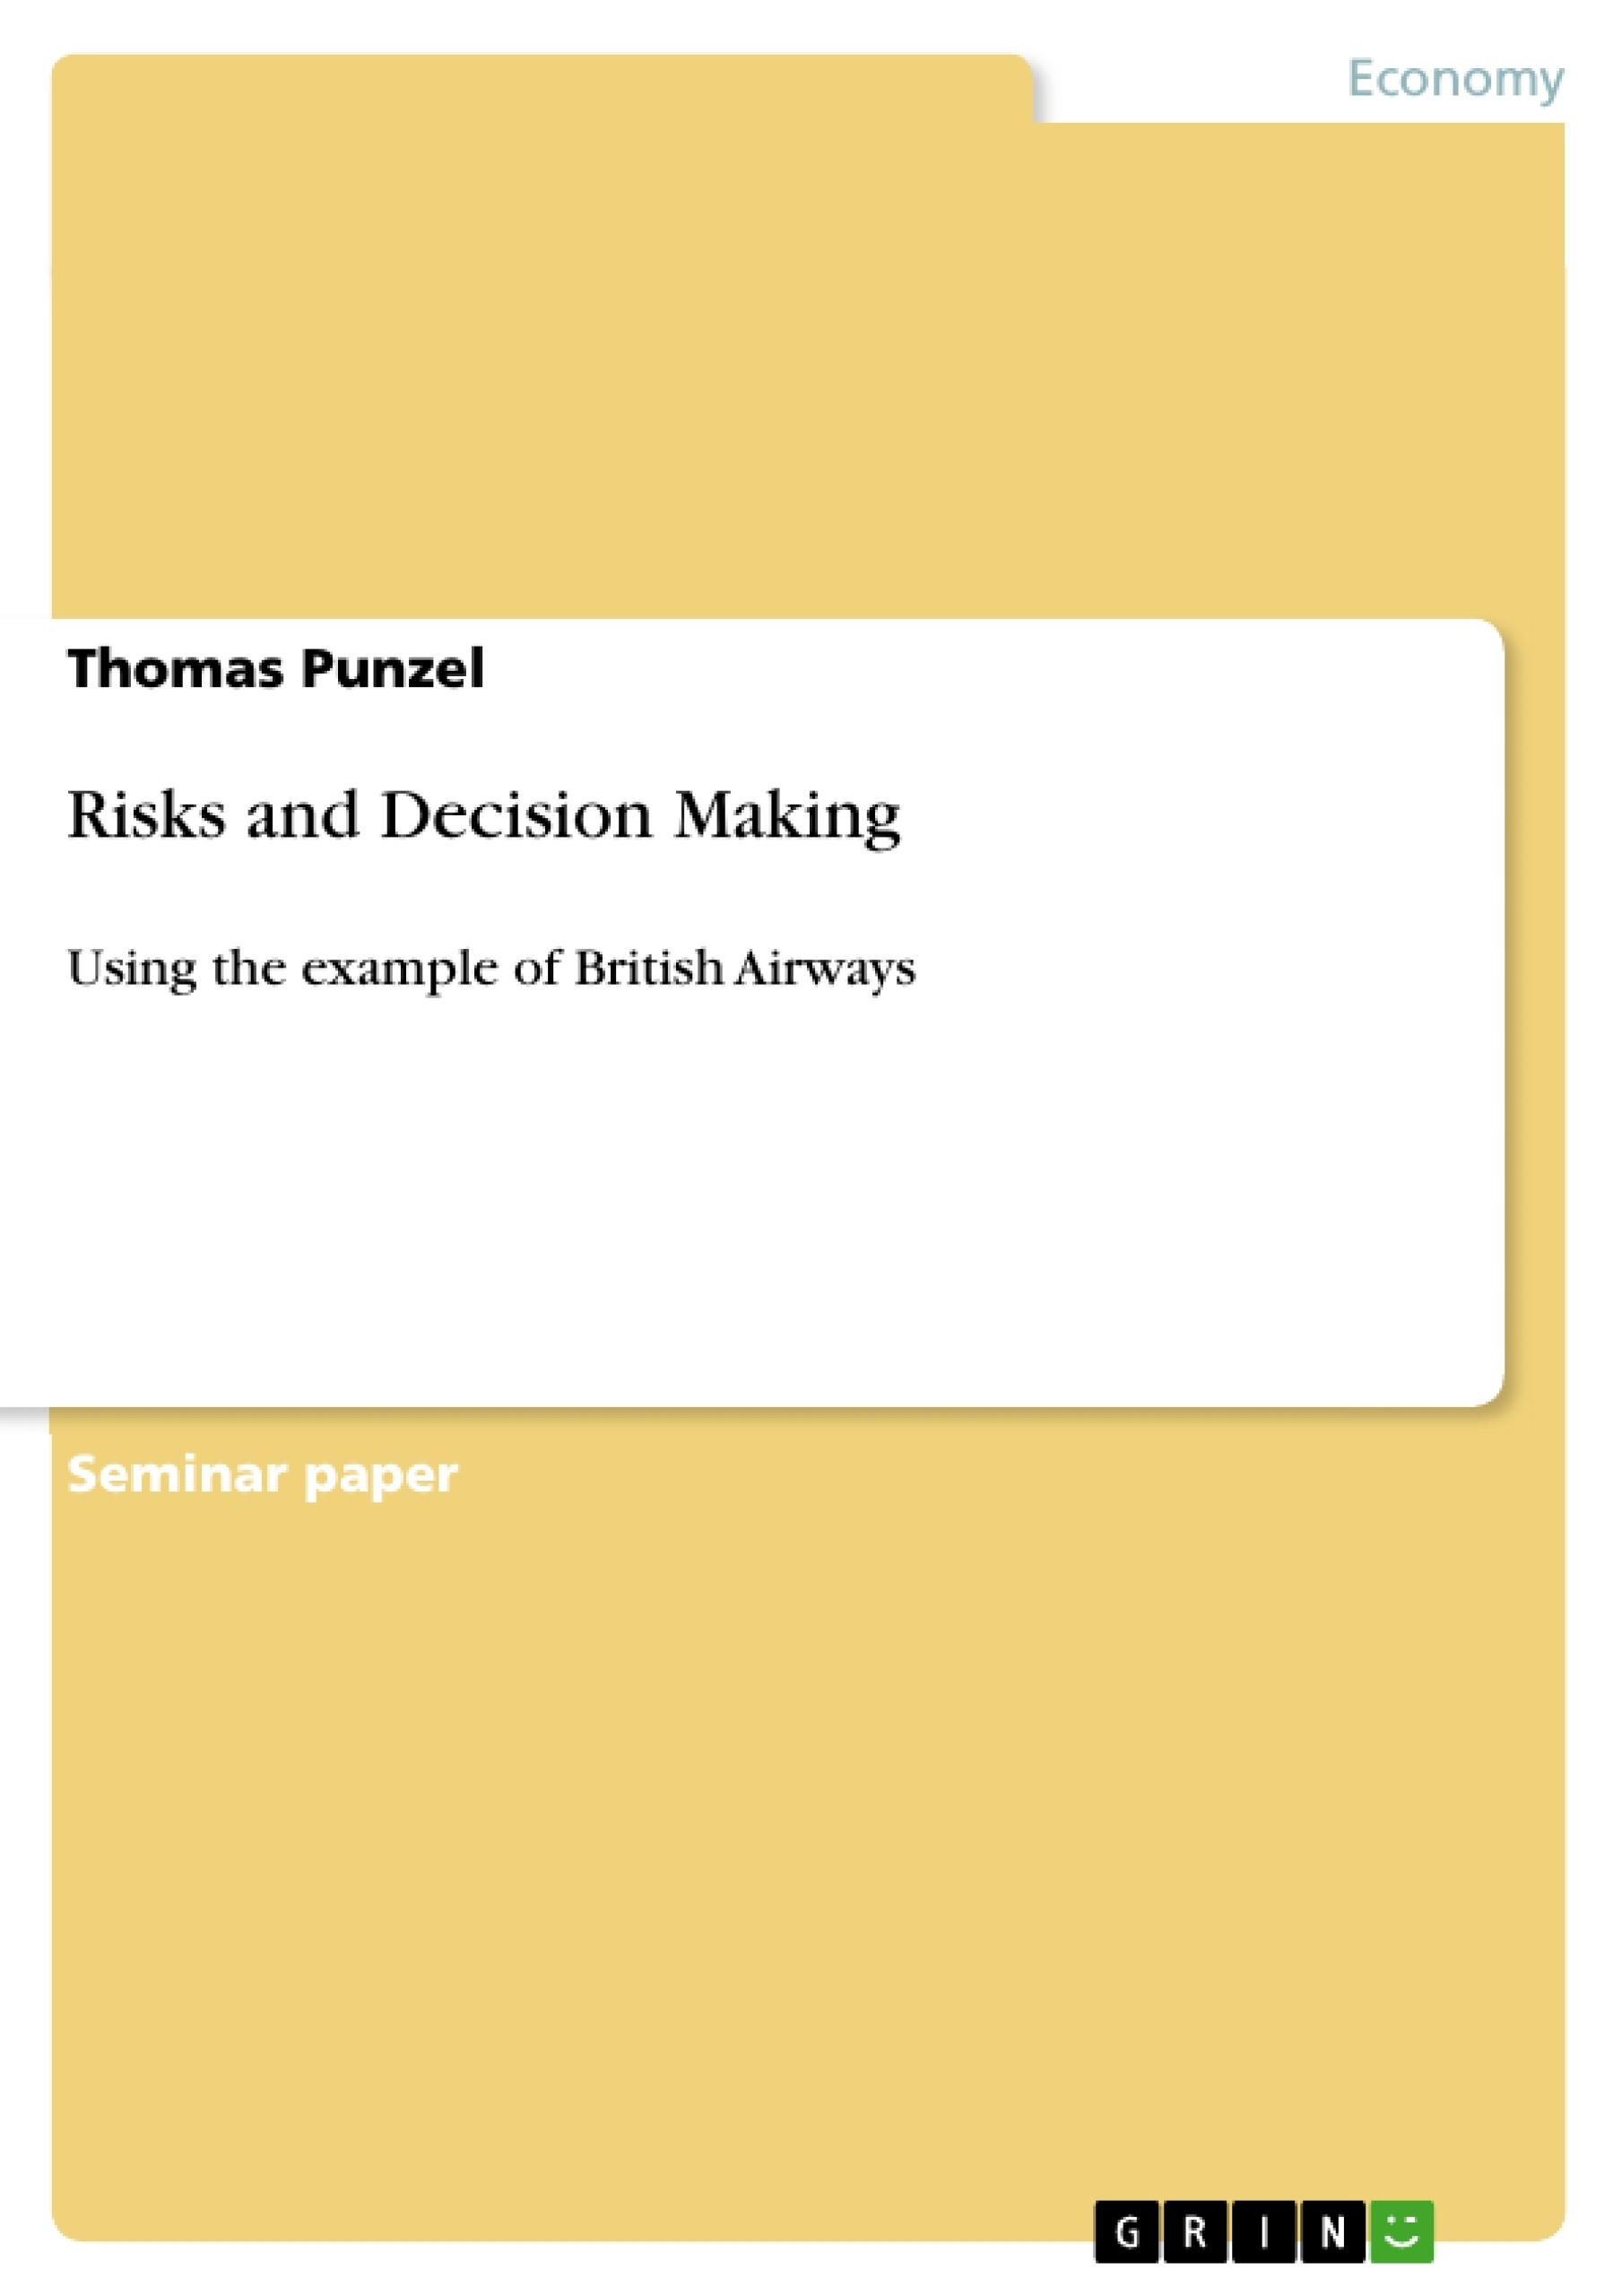 Title: Risks and Decision Making